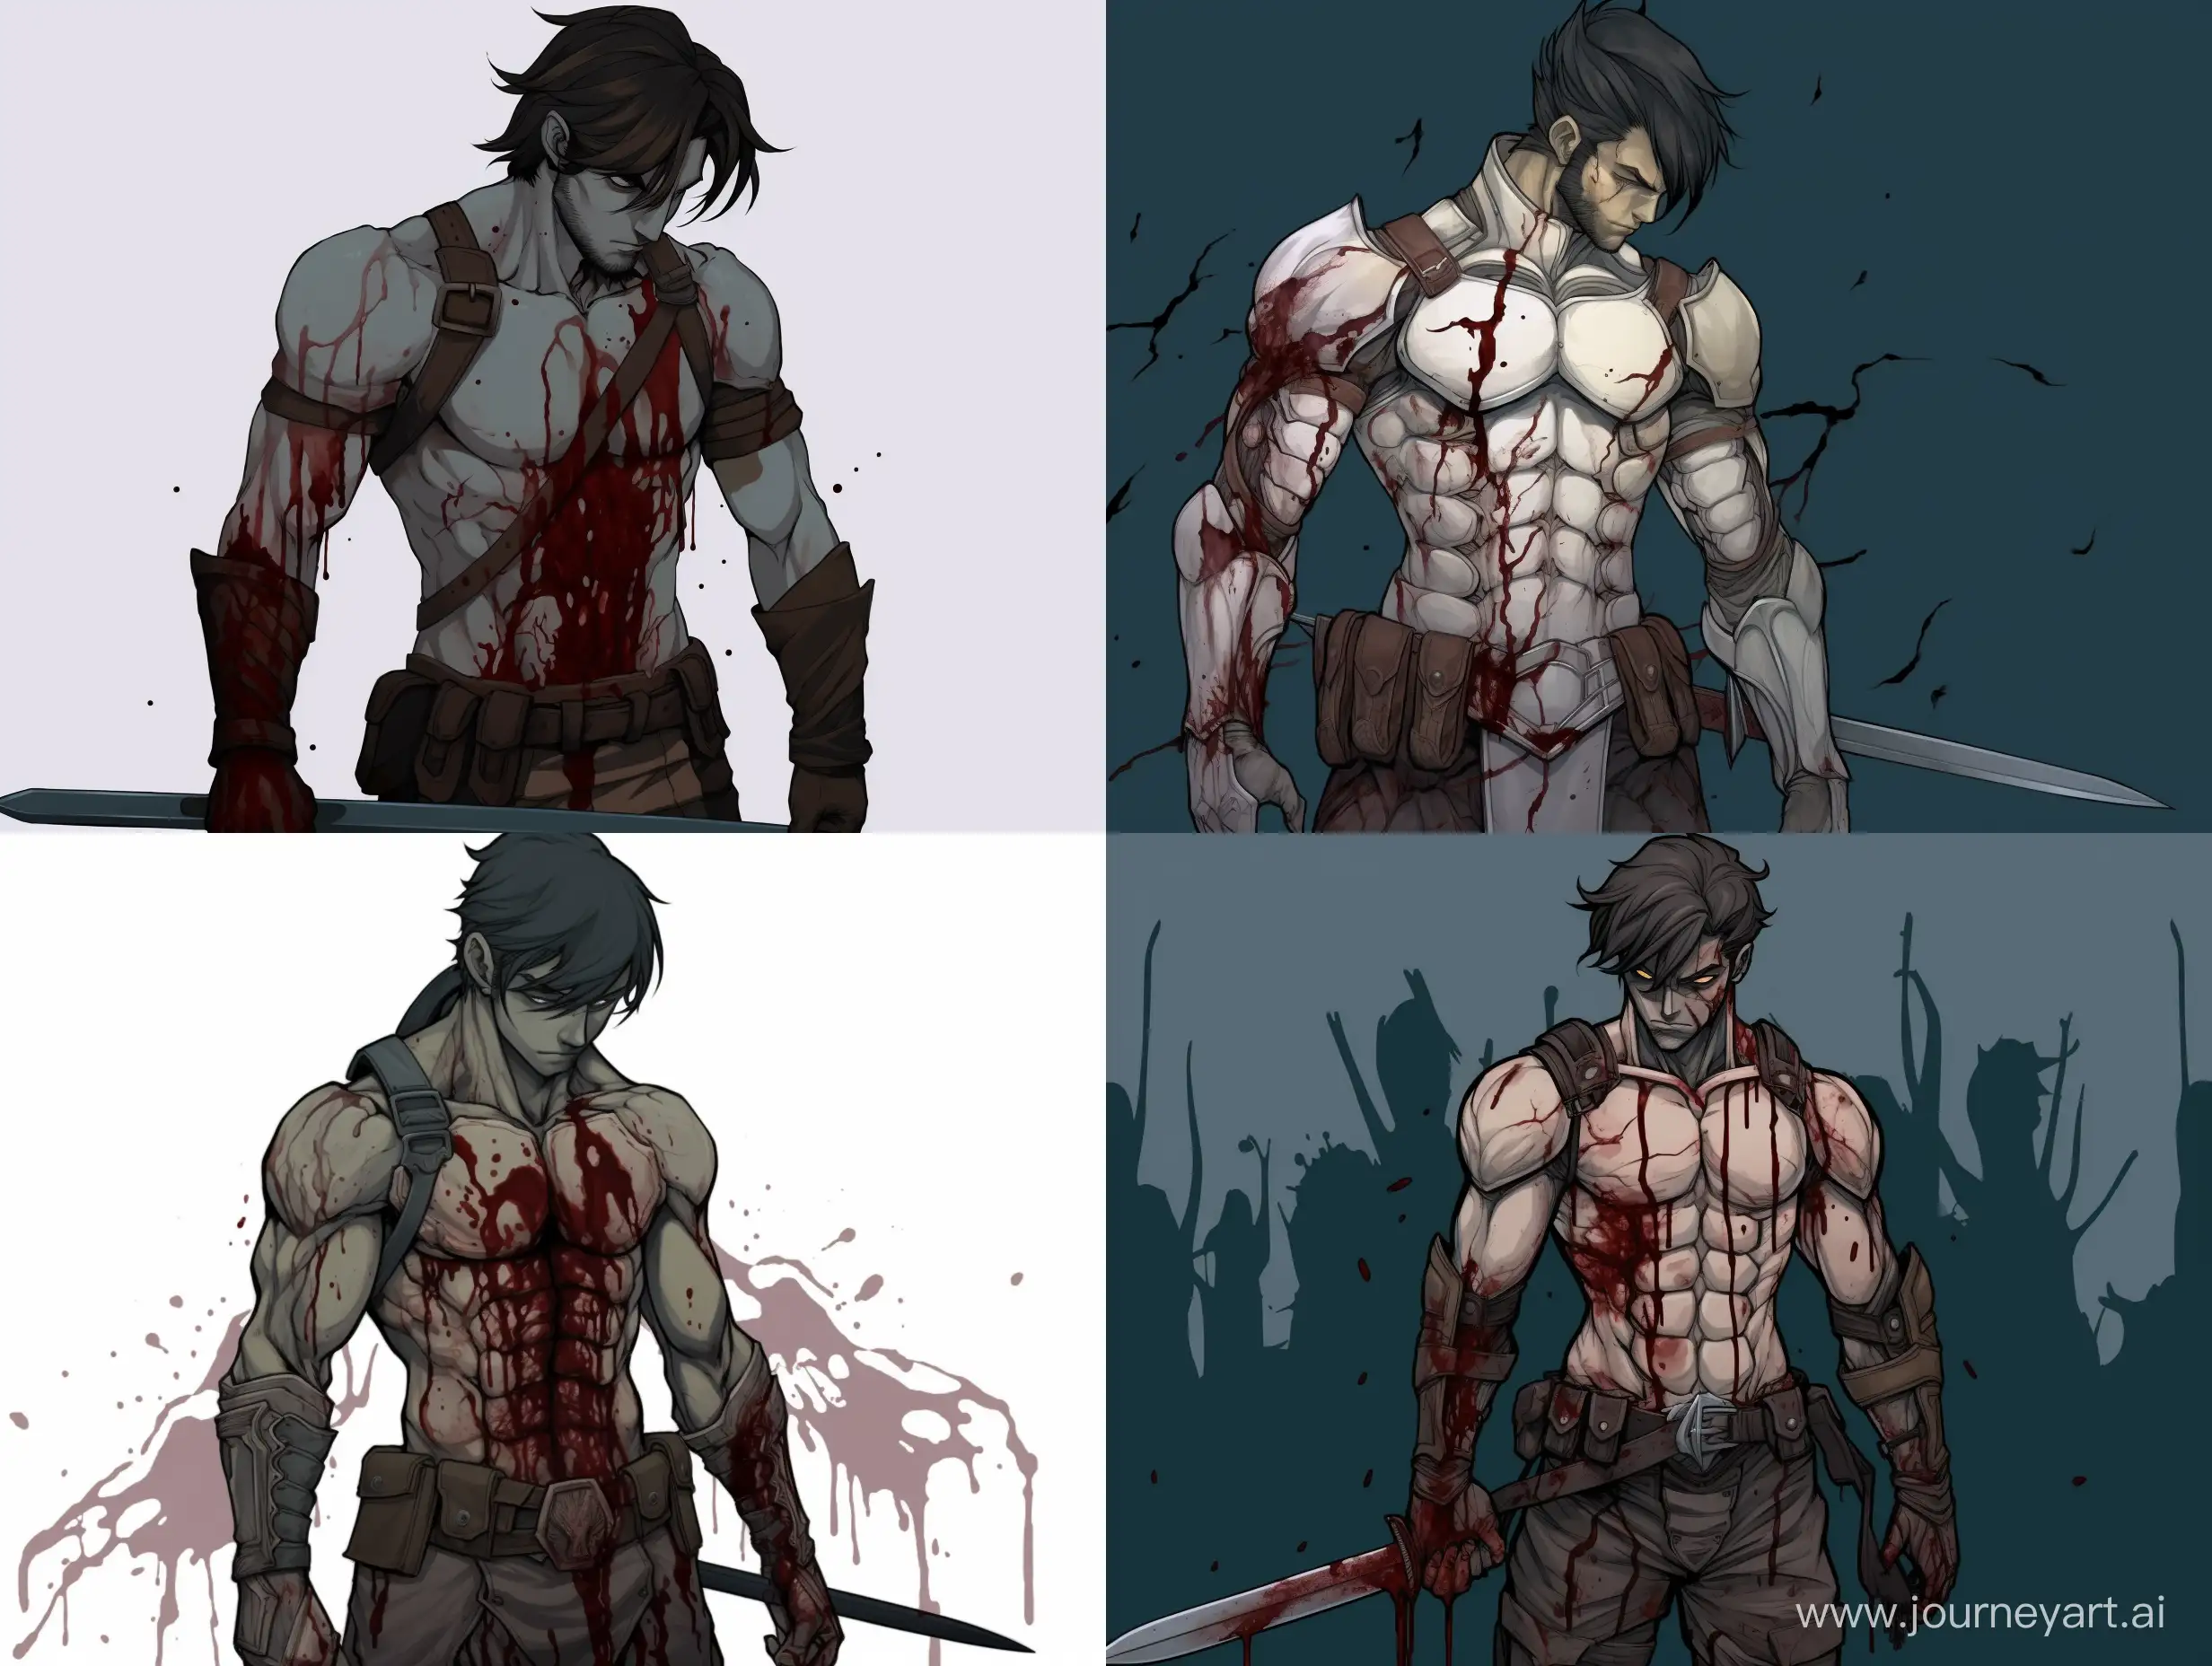 Brooding-Anime-Warrior-Muscular-Man-with-Battle-Scars